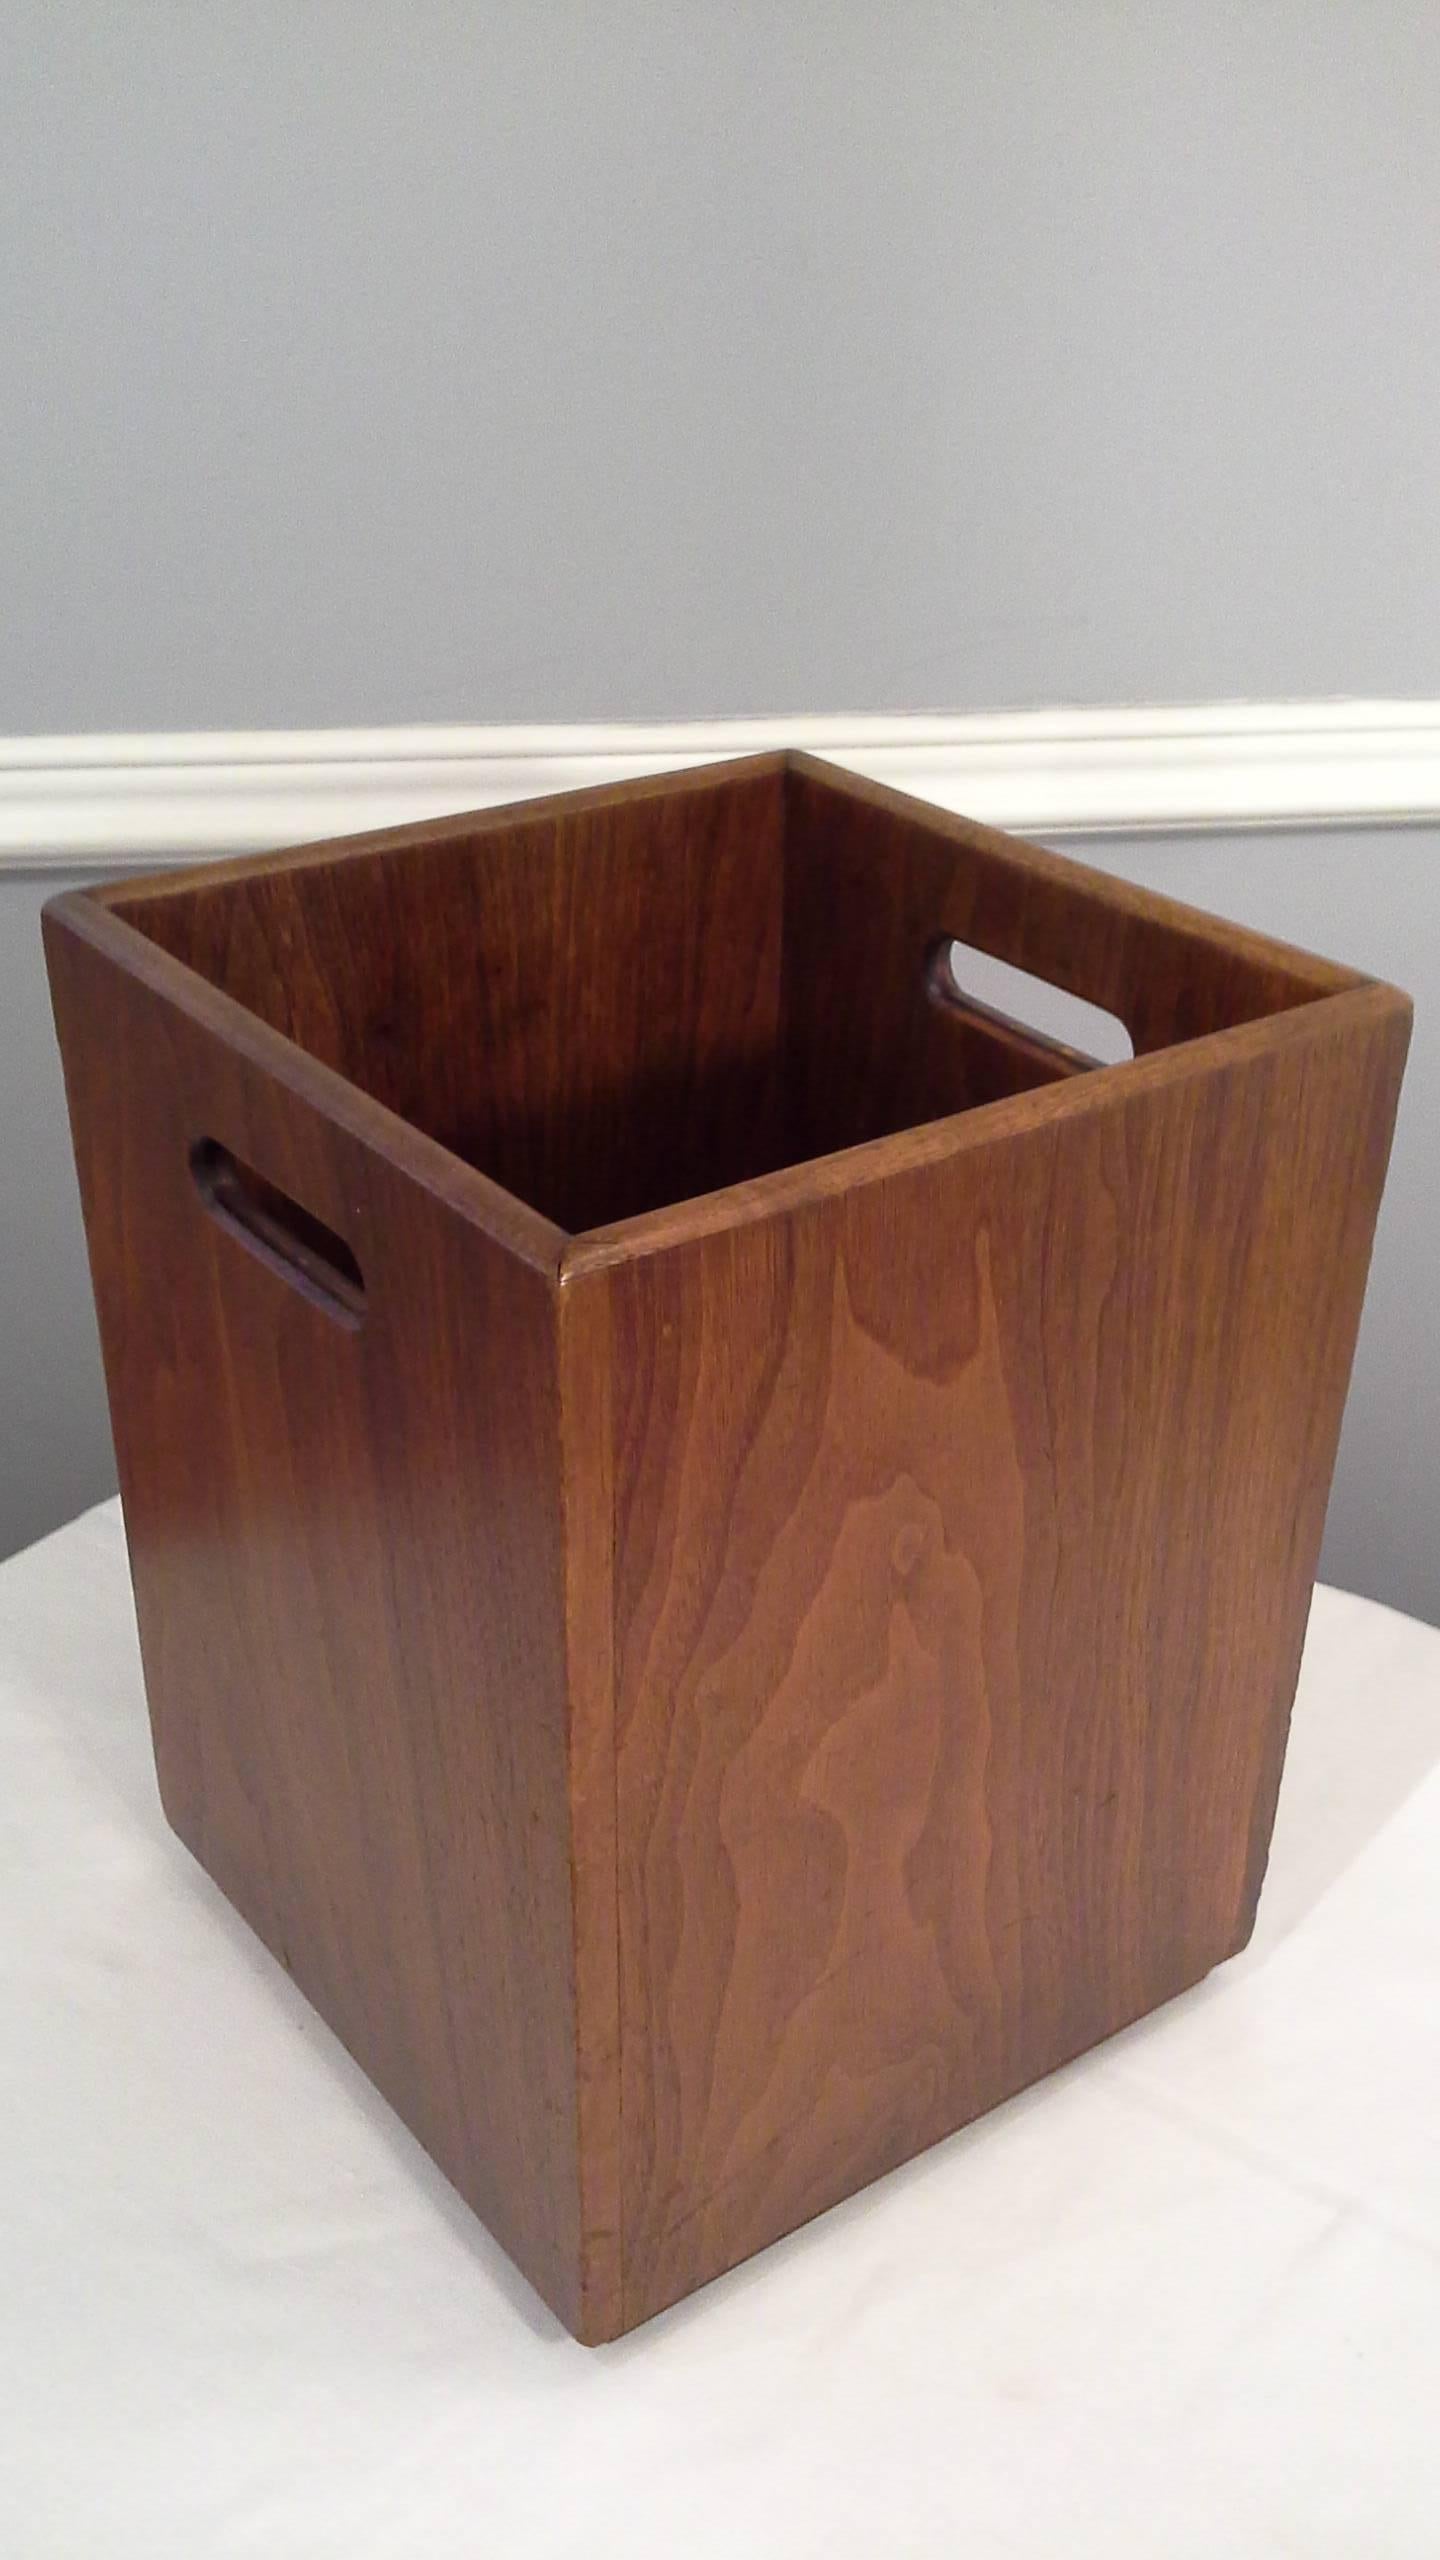 Mid-Century solid walnut waste baskets in a medium brown walnut finish. The baskets have two handle cut-out on opposite sides, the baskets are on a 1"-inch high base & measure 11"-inches x 11"-inches x 15"-inches high.
Note: